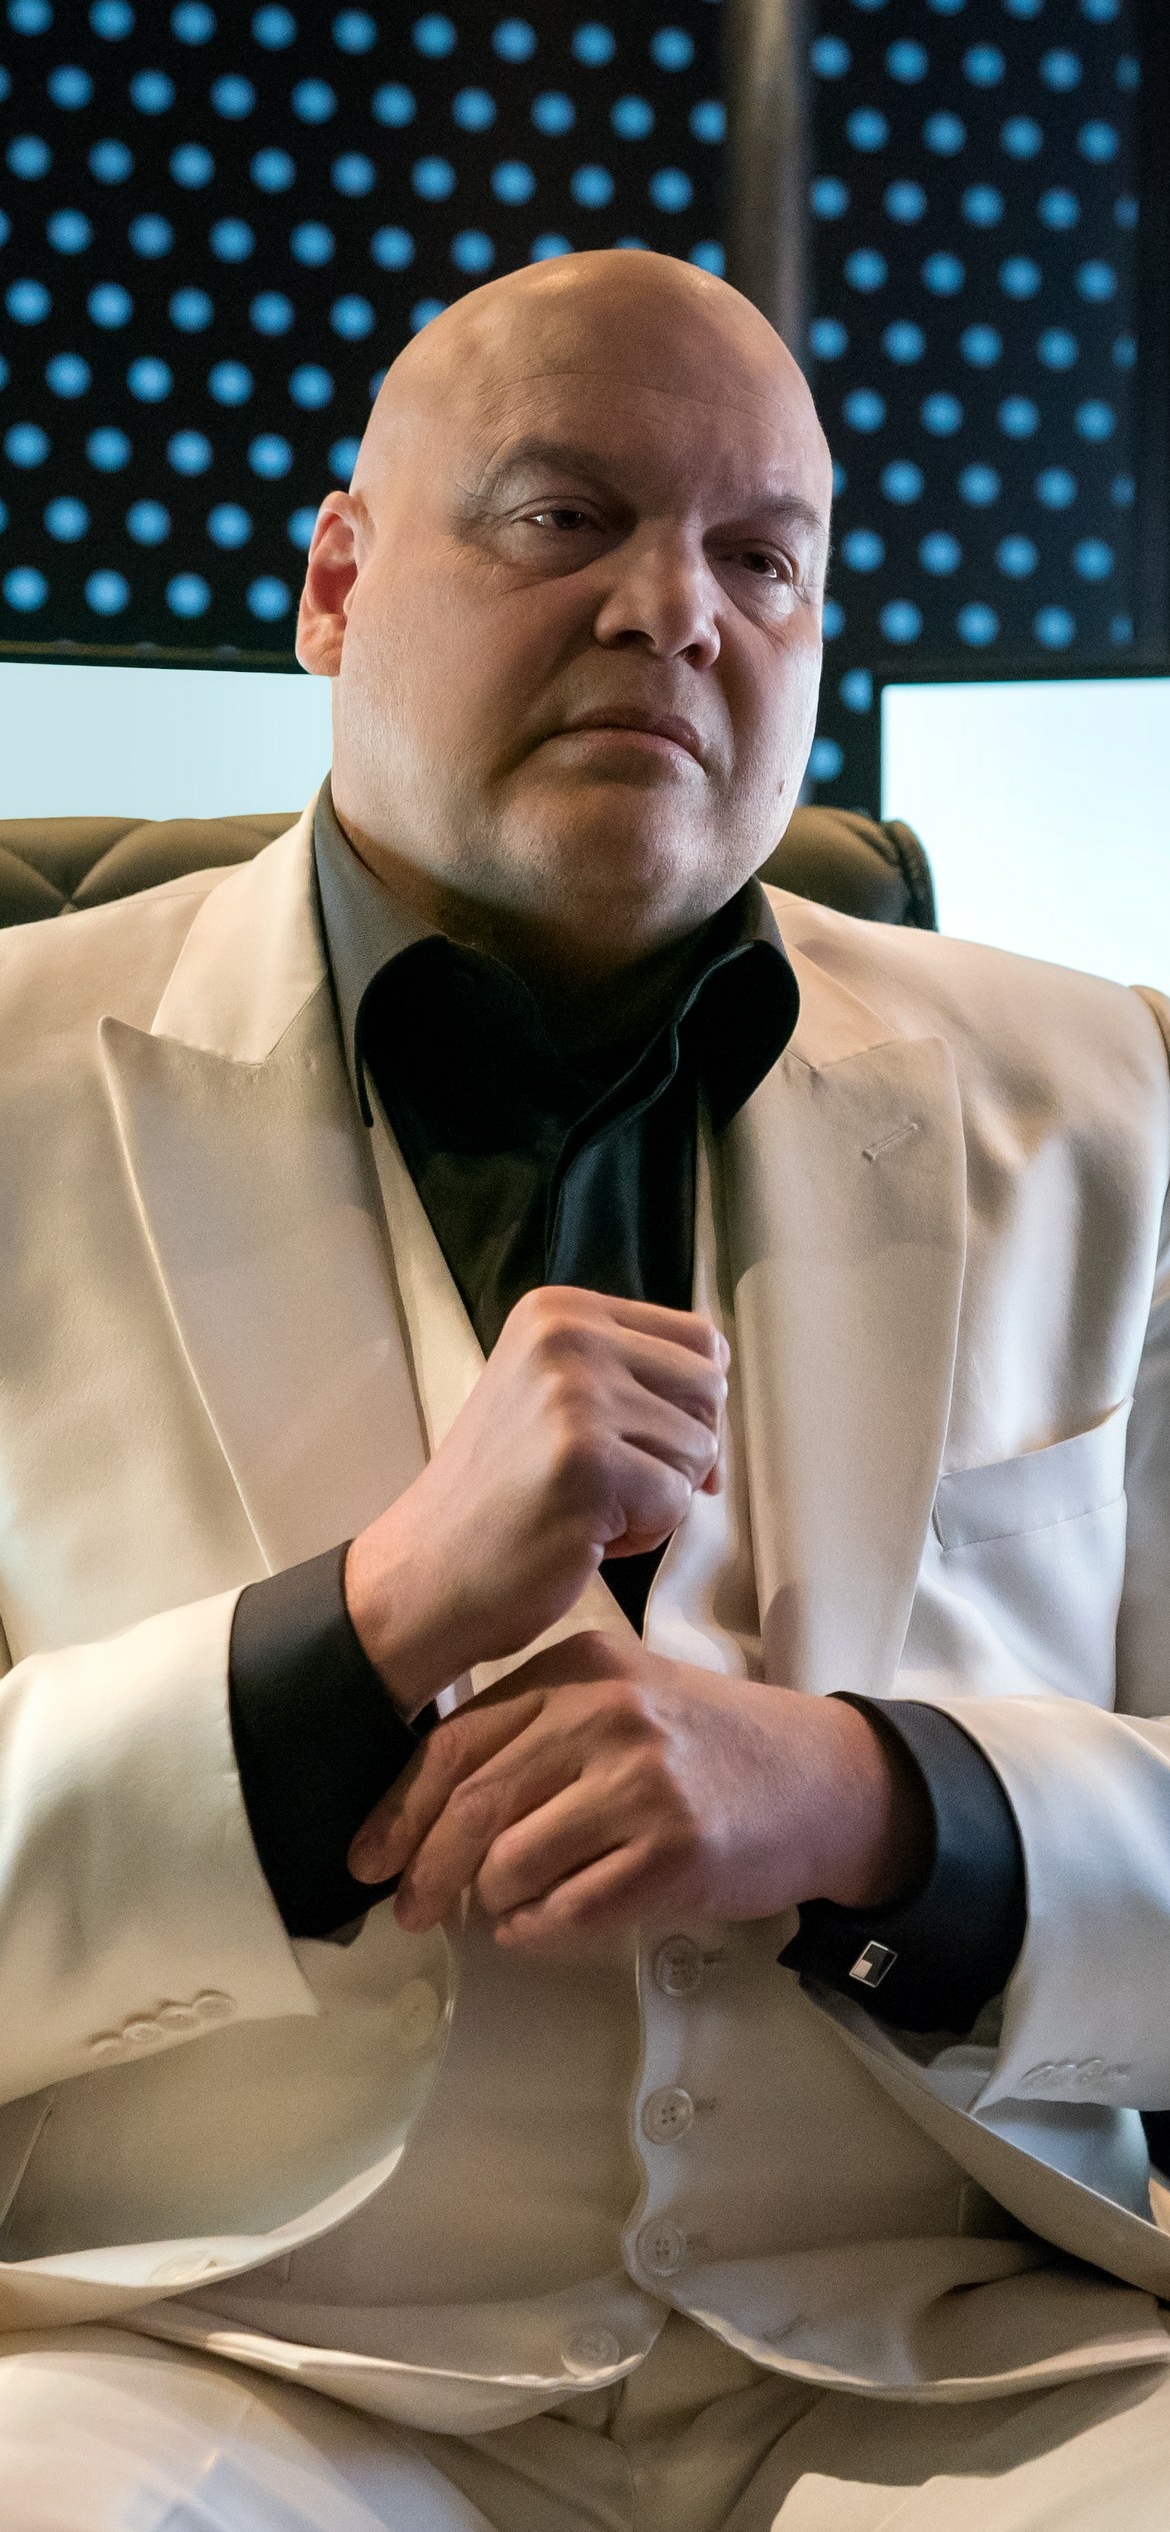 wilson fisk, tv show, daredevil, vincent d'onofrio for android